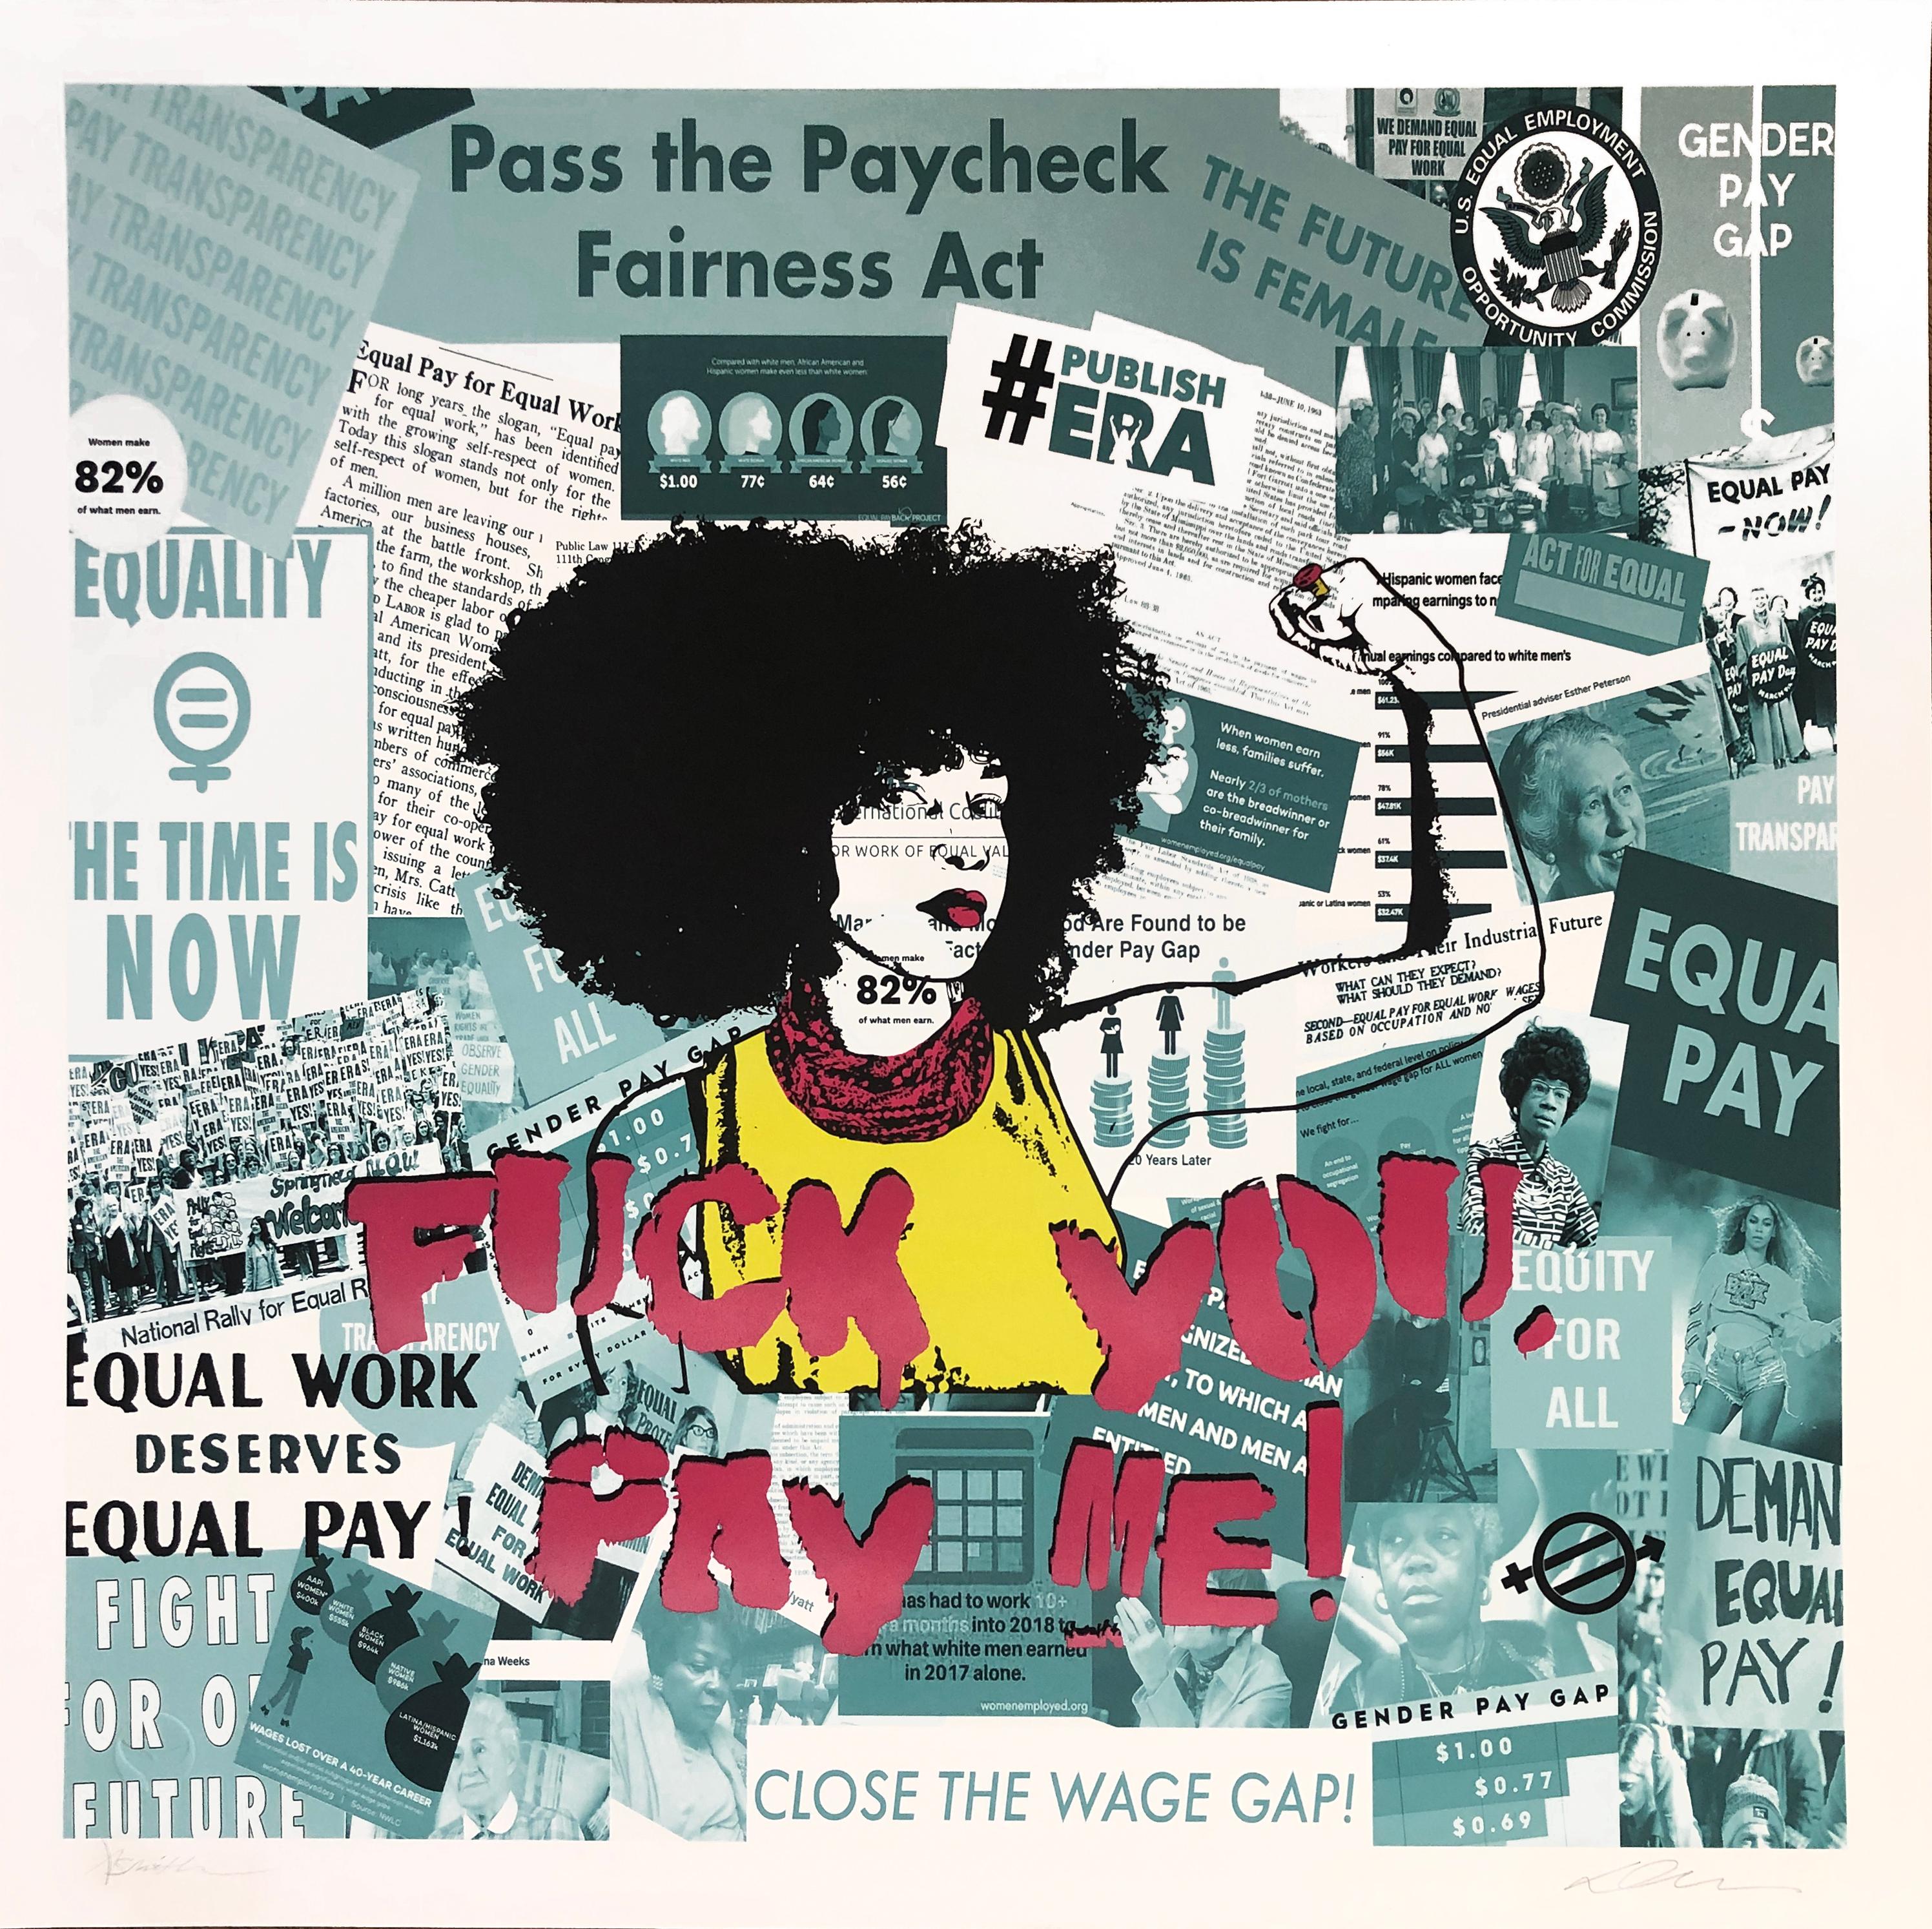 Fuck You, Pay Me! - Contemporary POP Street Art Embellished Print for Equal Pay  - Mixed Media Art by Amy Smith